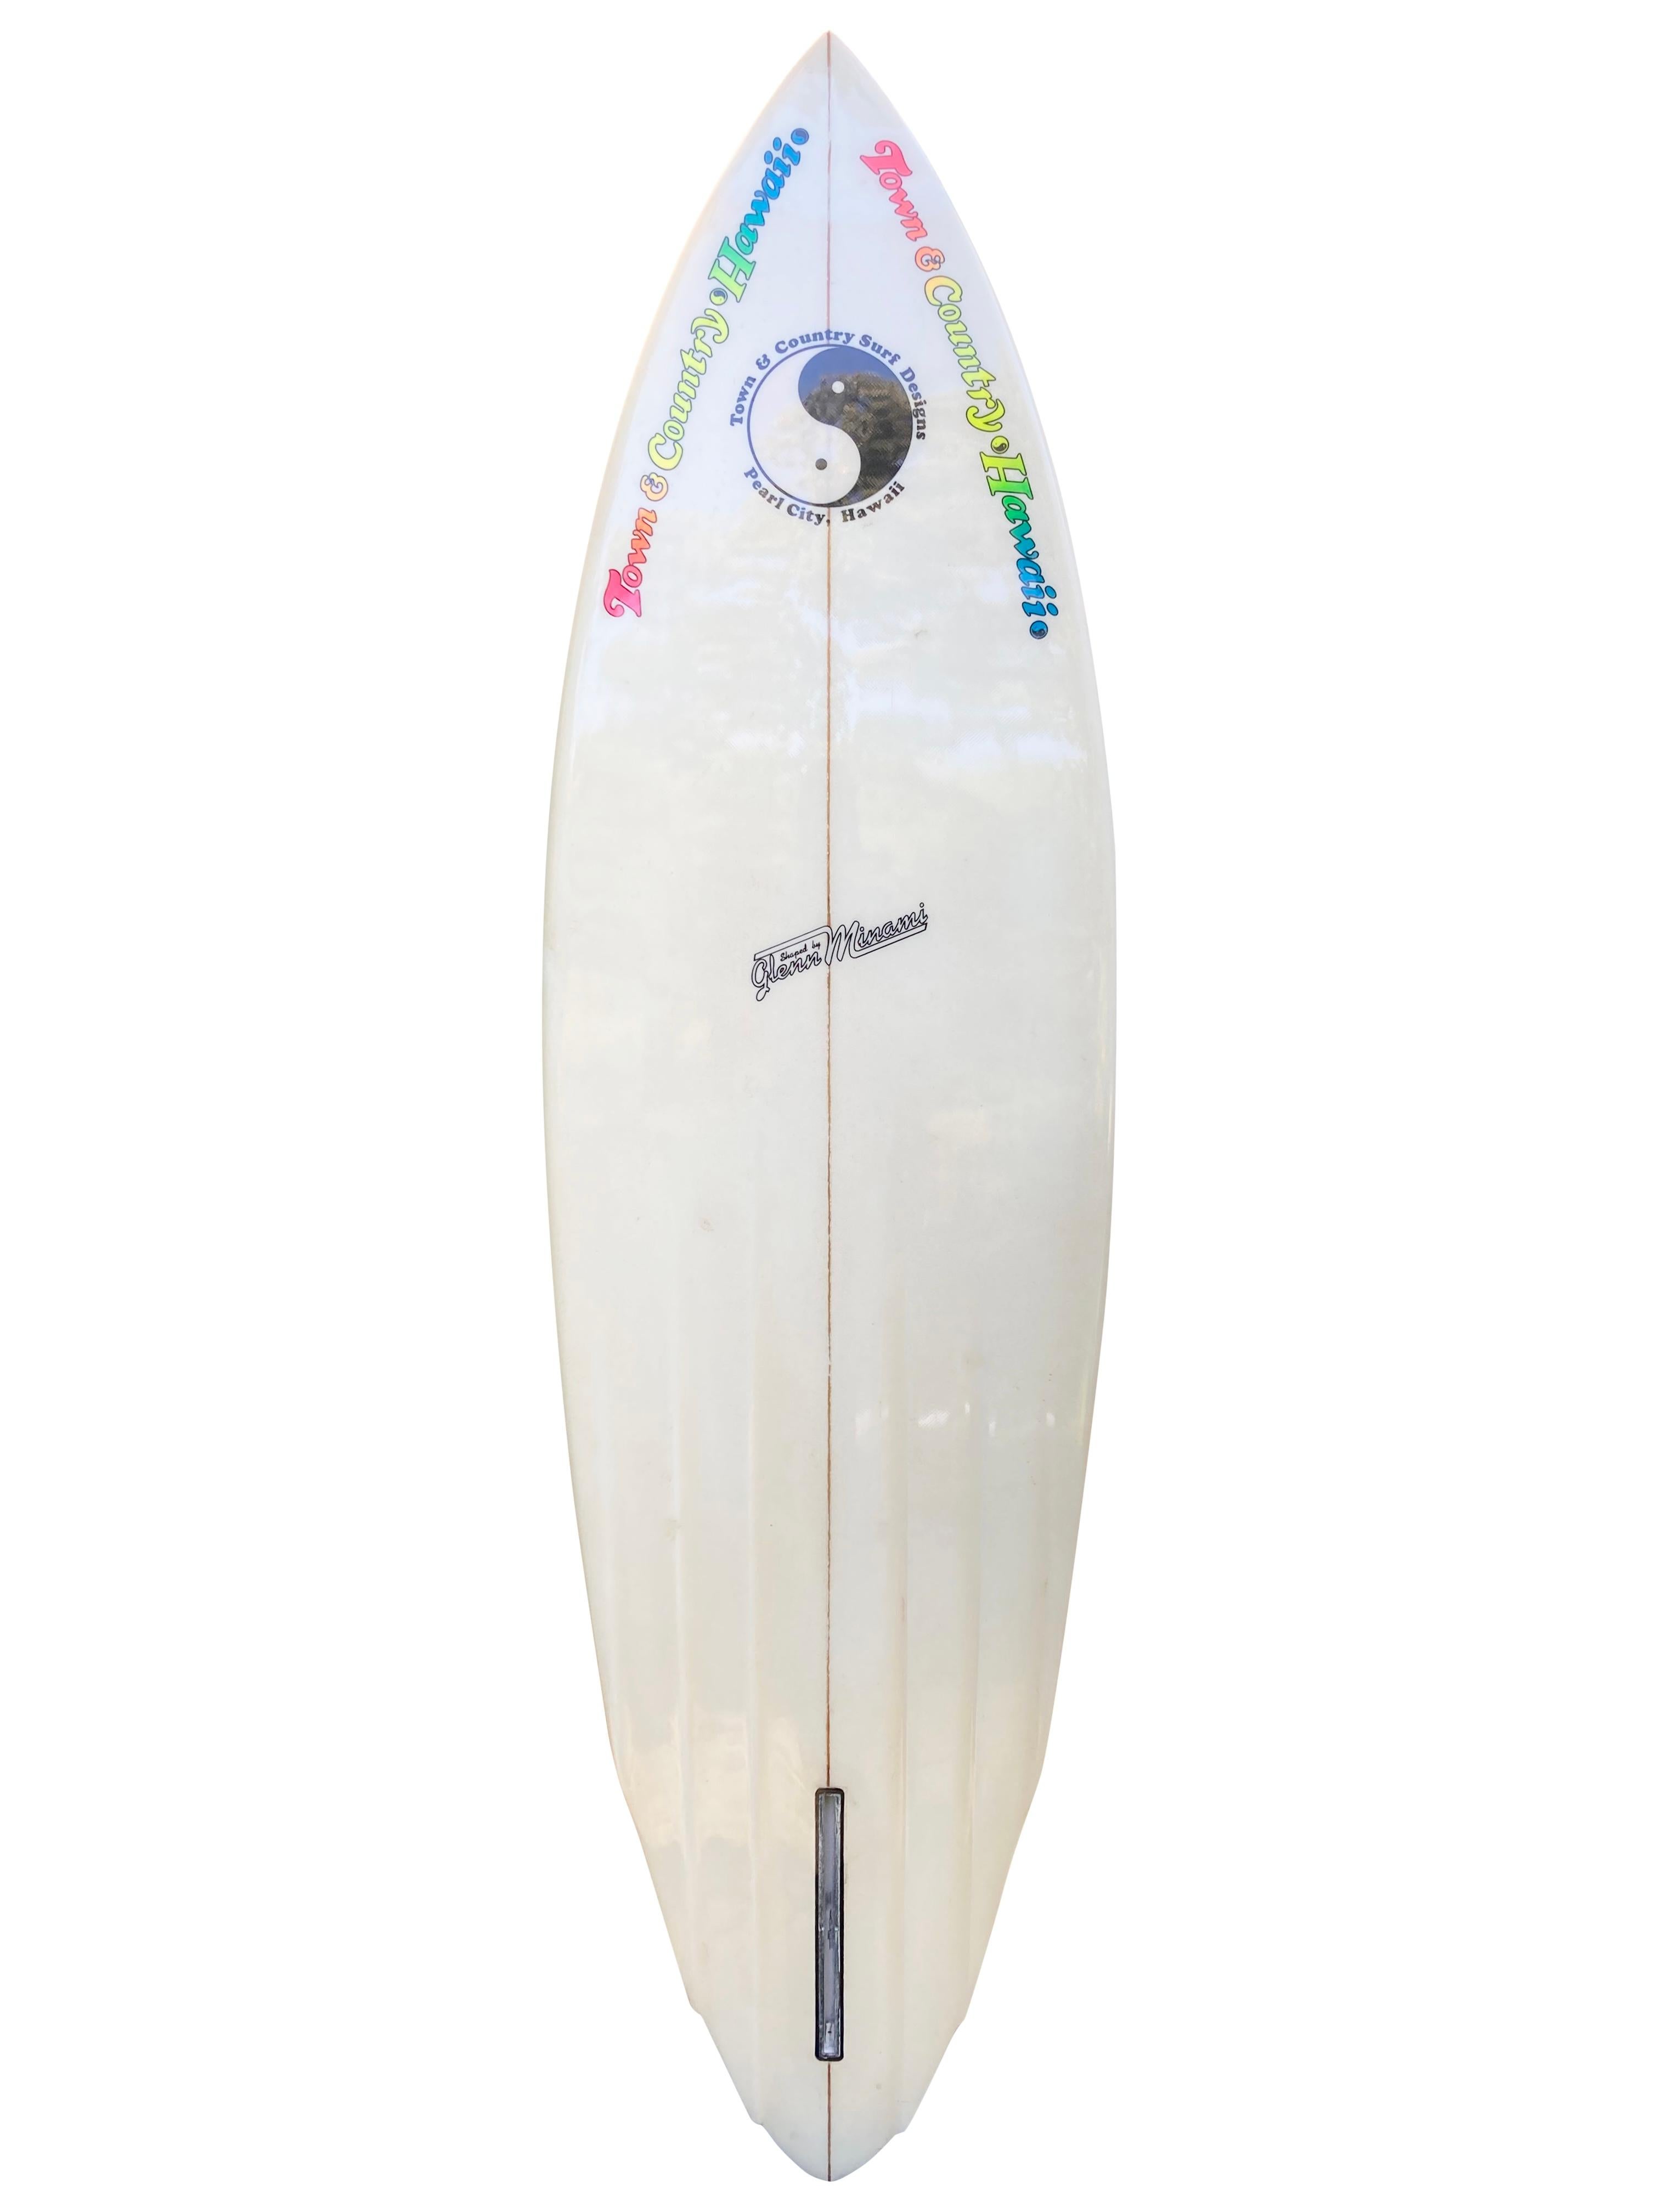 1981 vintage Town and Country surfboard made by Glenn Minami. Features a rounded pintail shape design with channel bottom built for speed. Beautiful blue retro 80s airbrush design. An incredible example of an early 1980s vintage surfboard made under